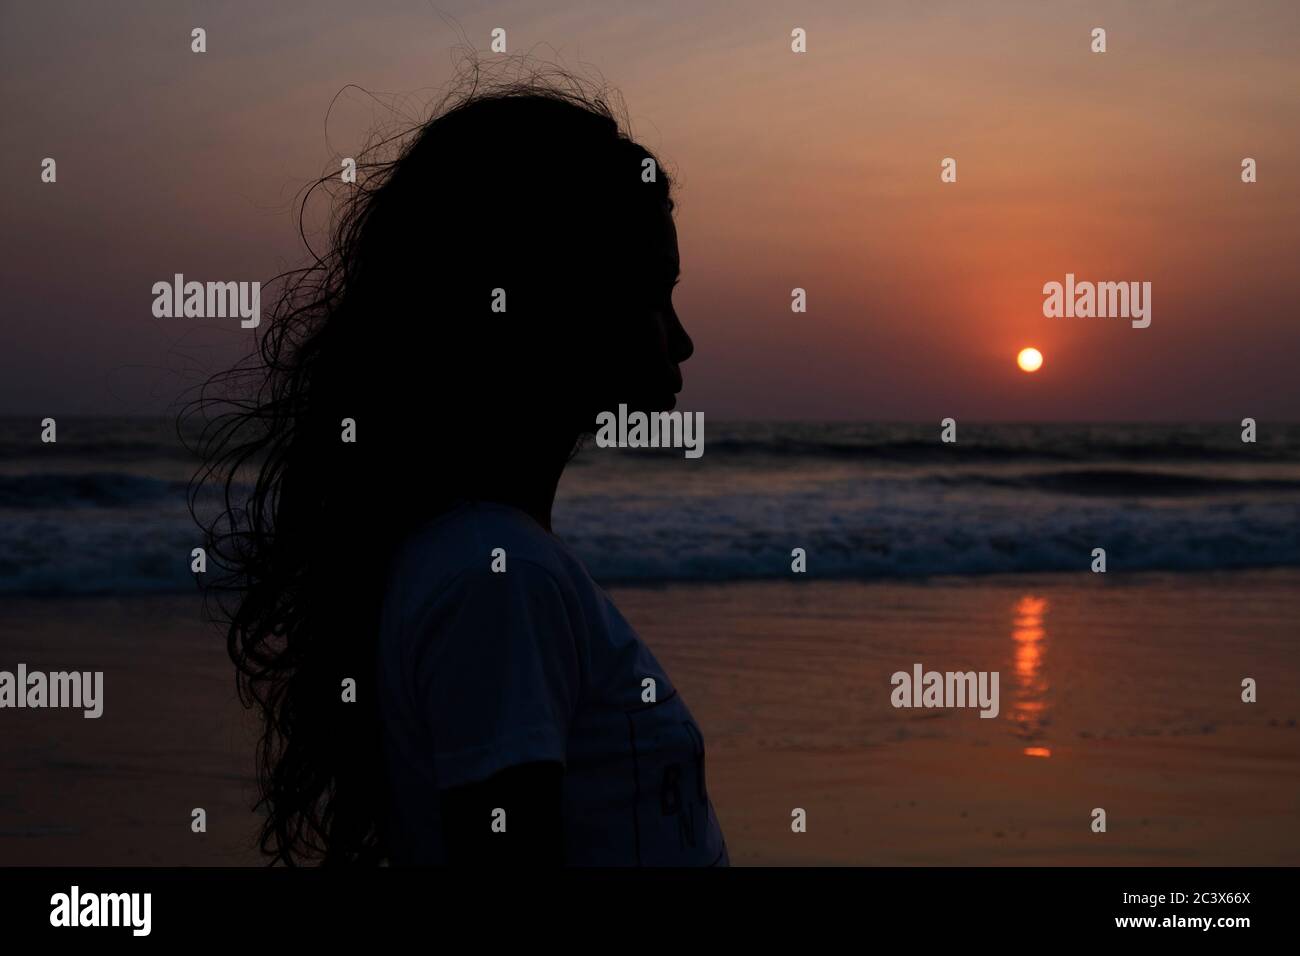 Profile silhouette of young woman at sunset at Majorda beach in Goa, India. Stock Photo